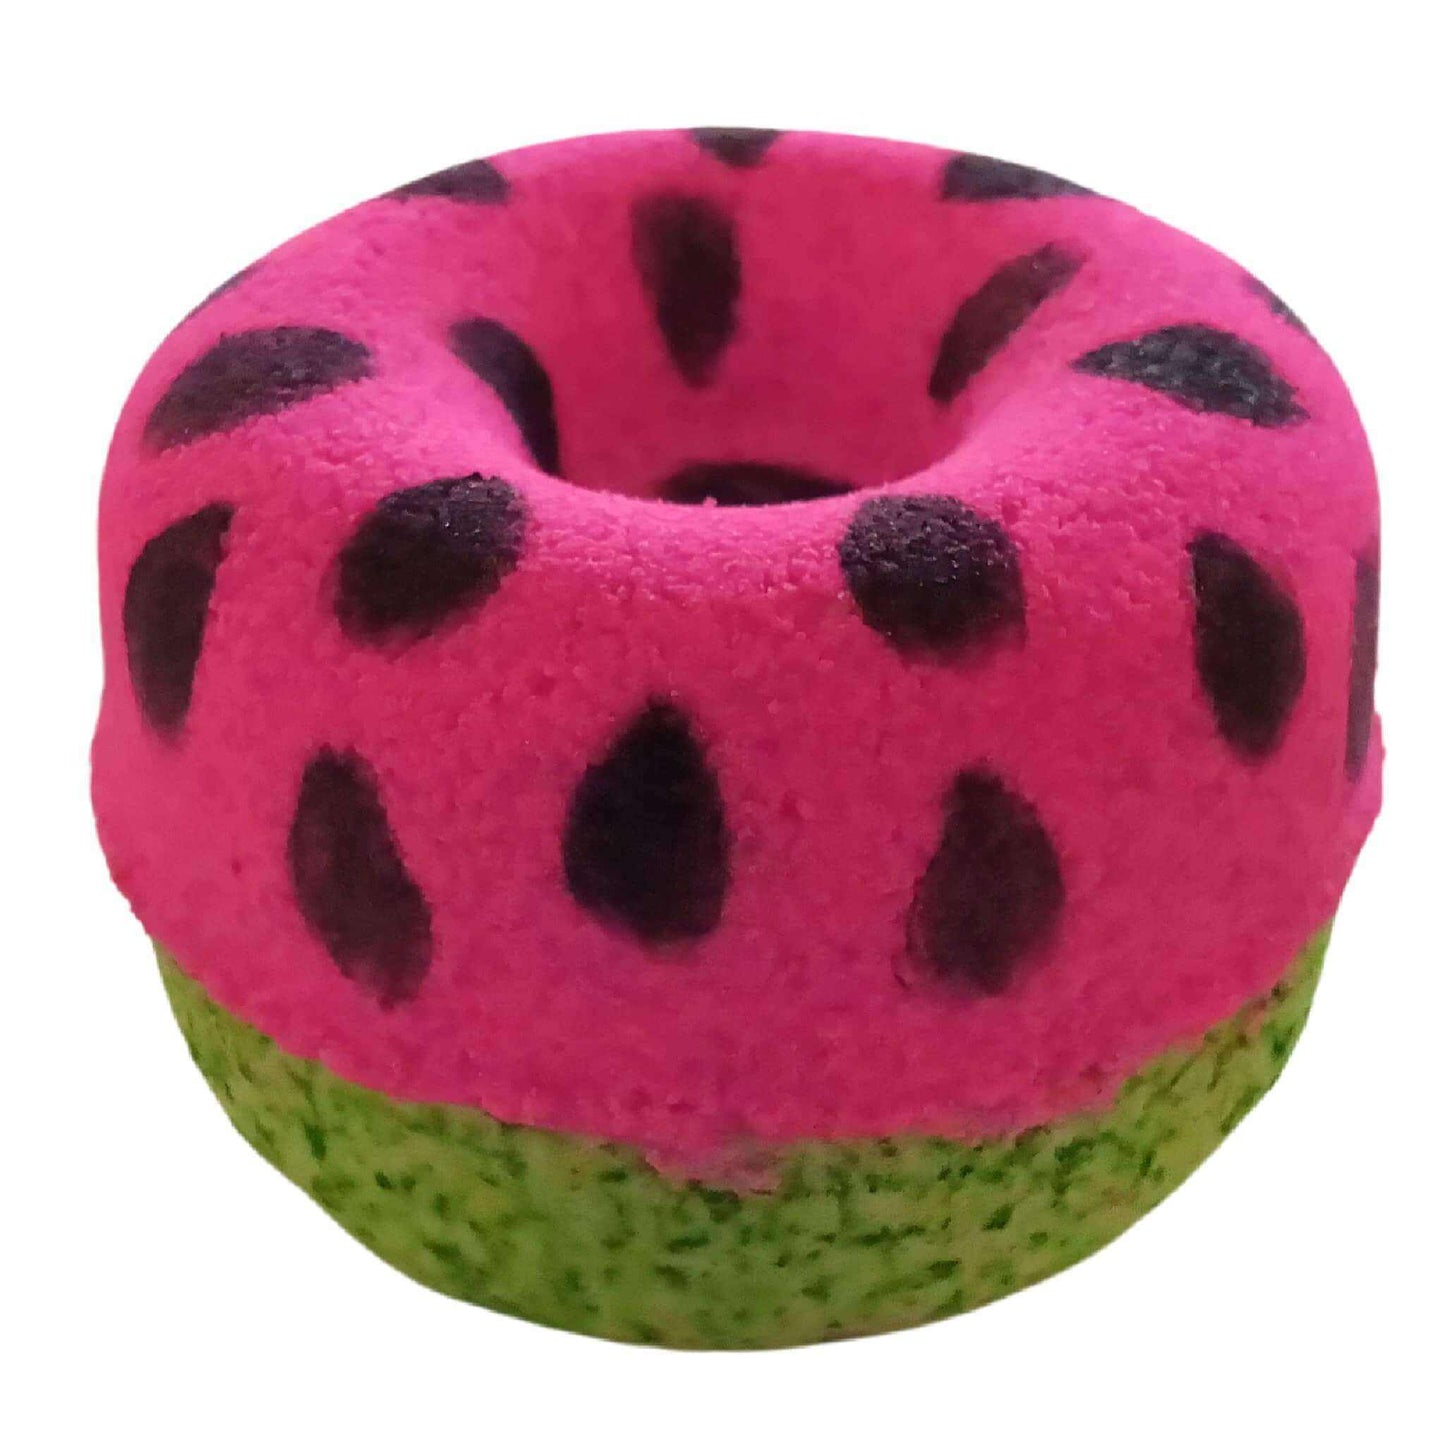 Summer picnic watermelon bath bomb brings a refreshing burst of summer to your tub. Immerse yourself!